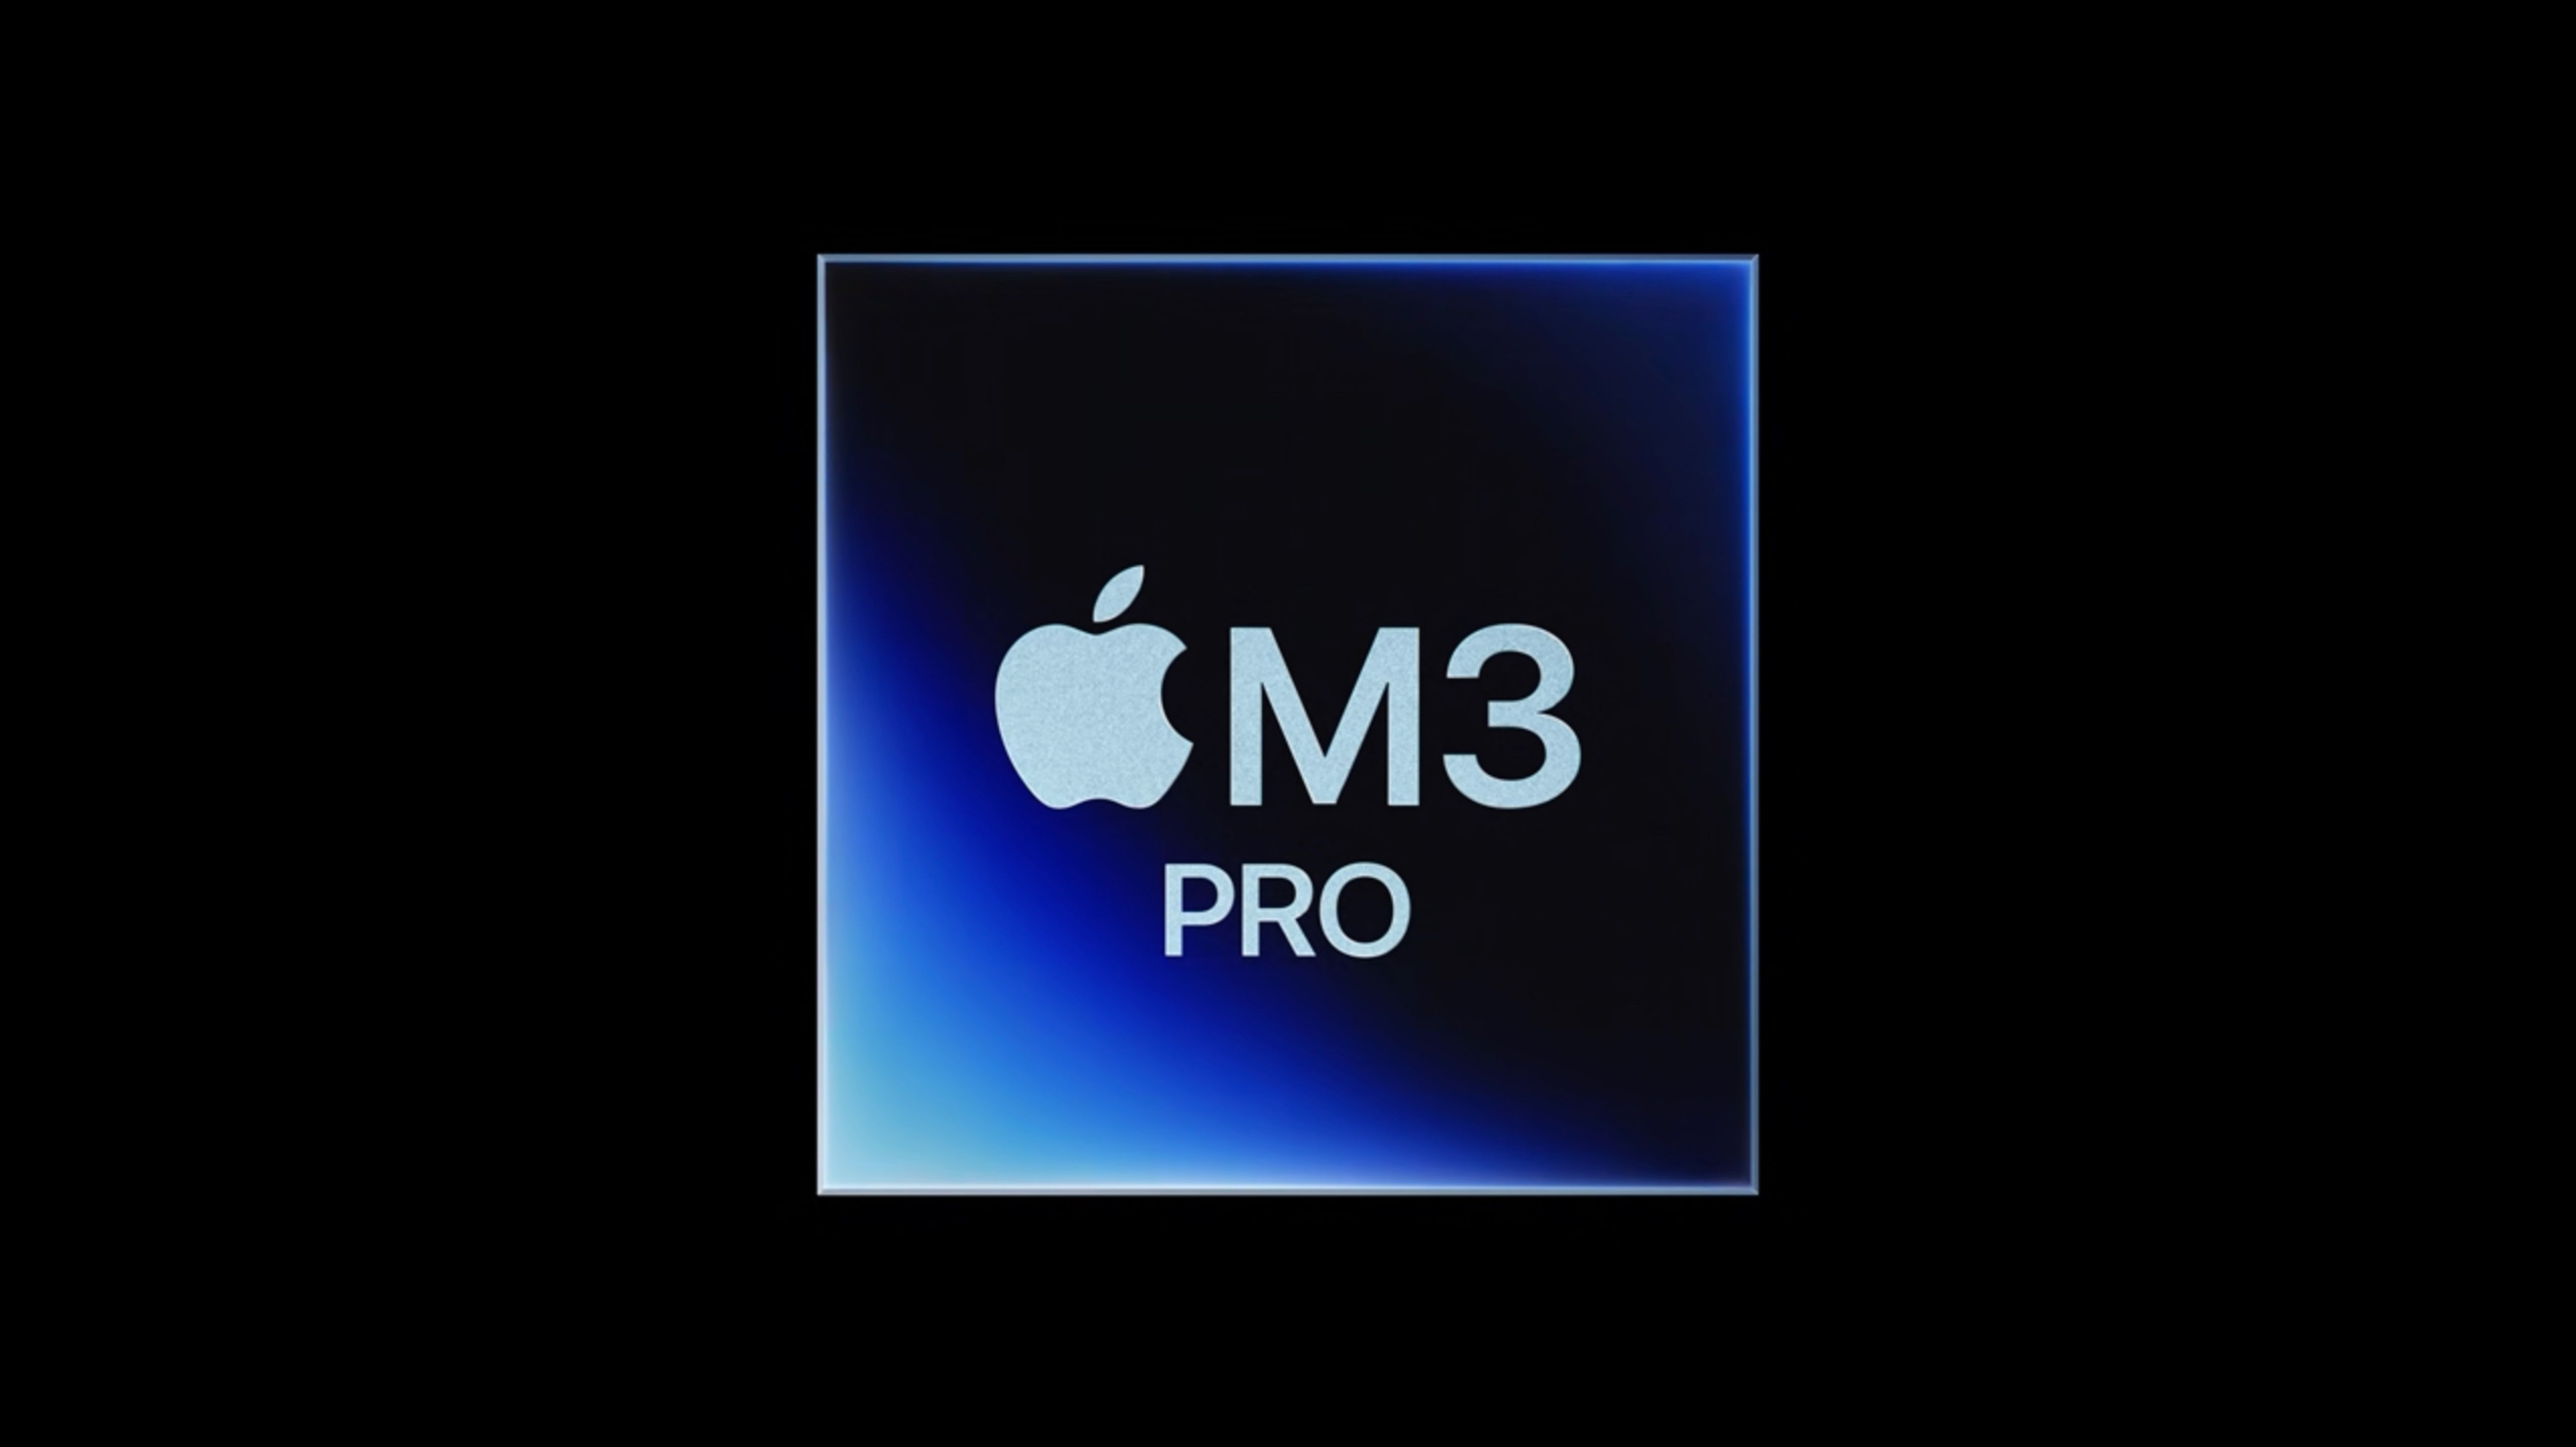 The Apple M3 Pro chip has 25% less memory bandwidth than the M1/M2 Pro chip